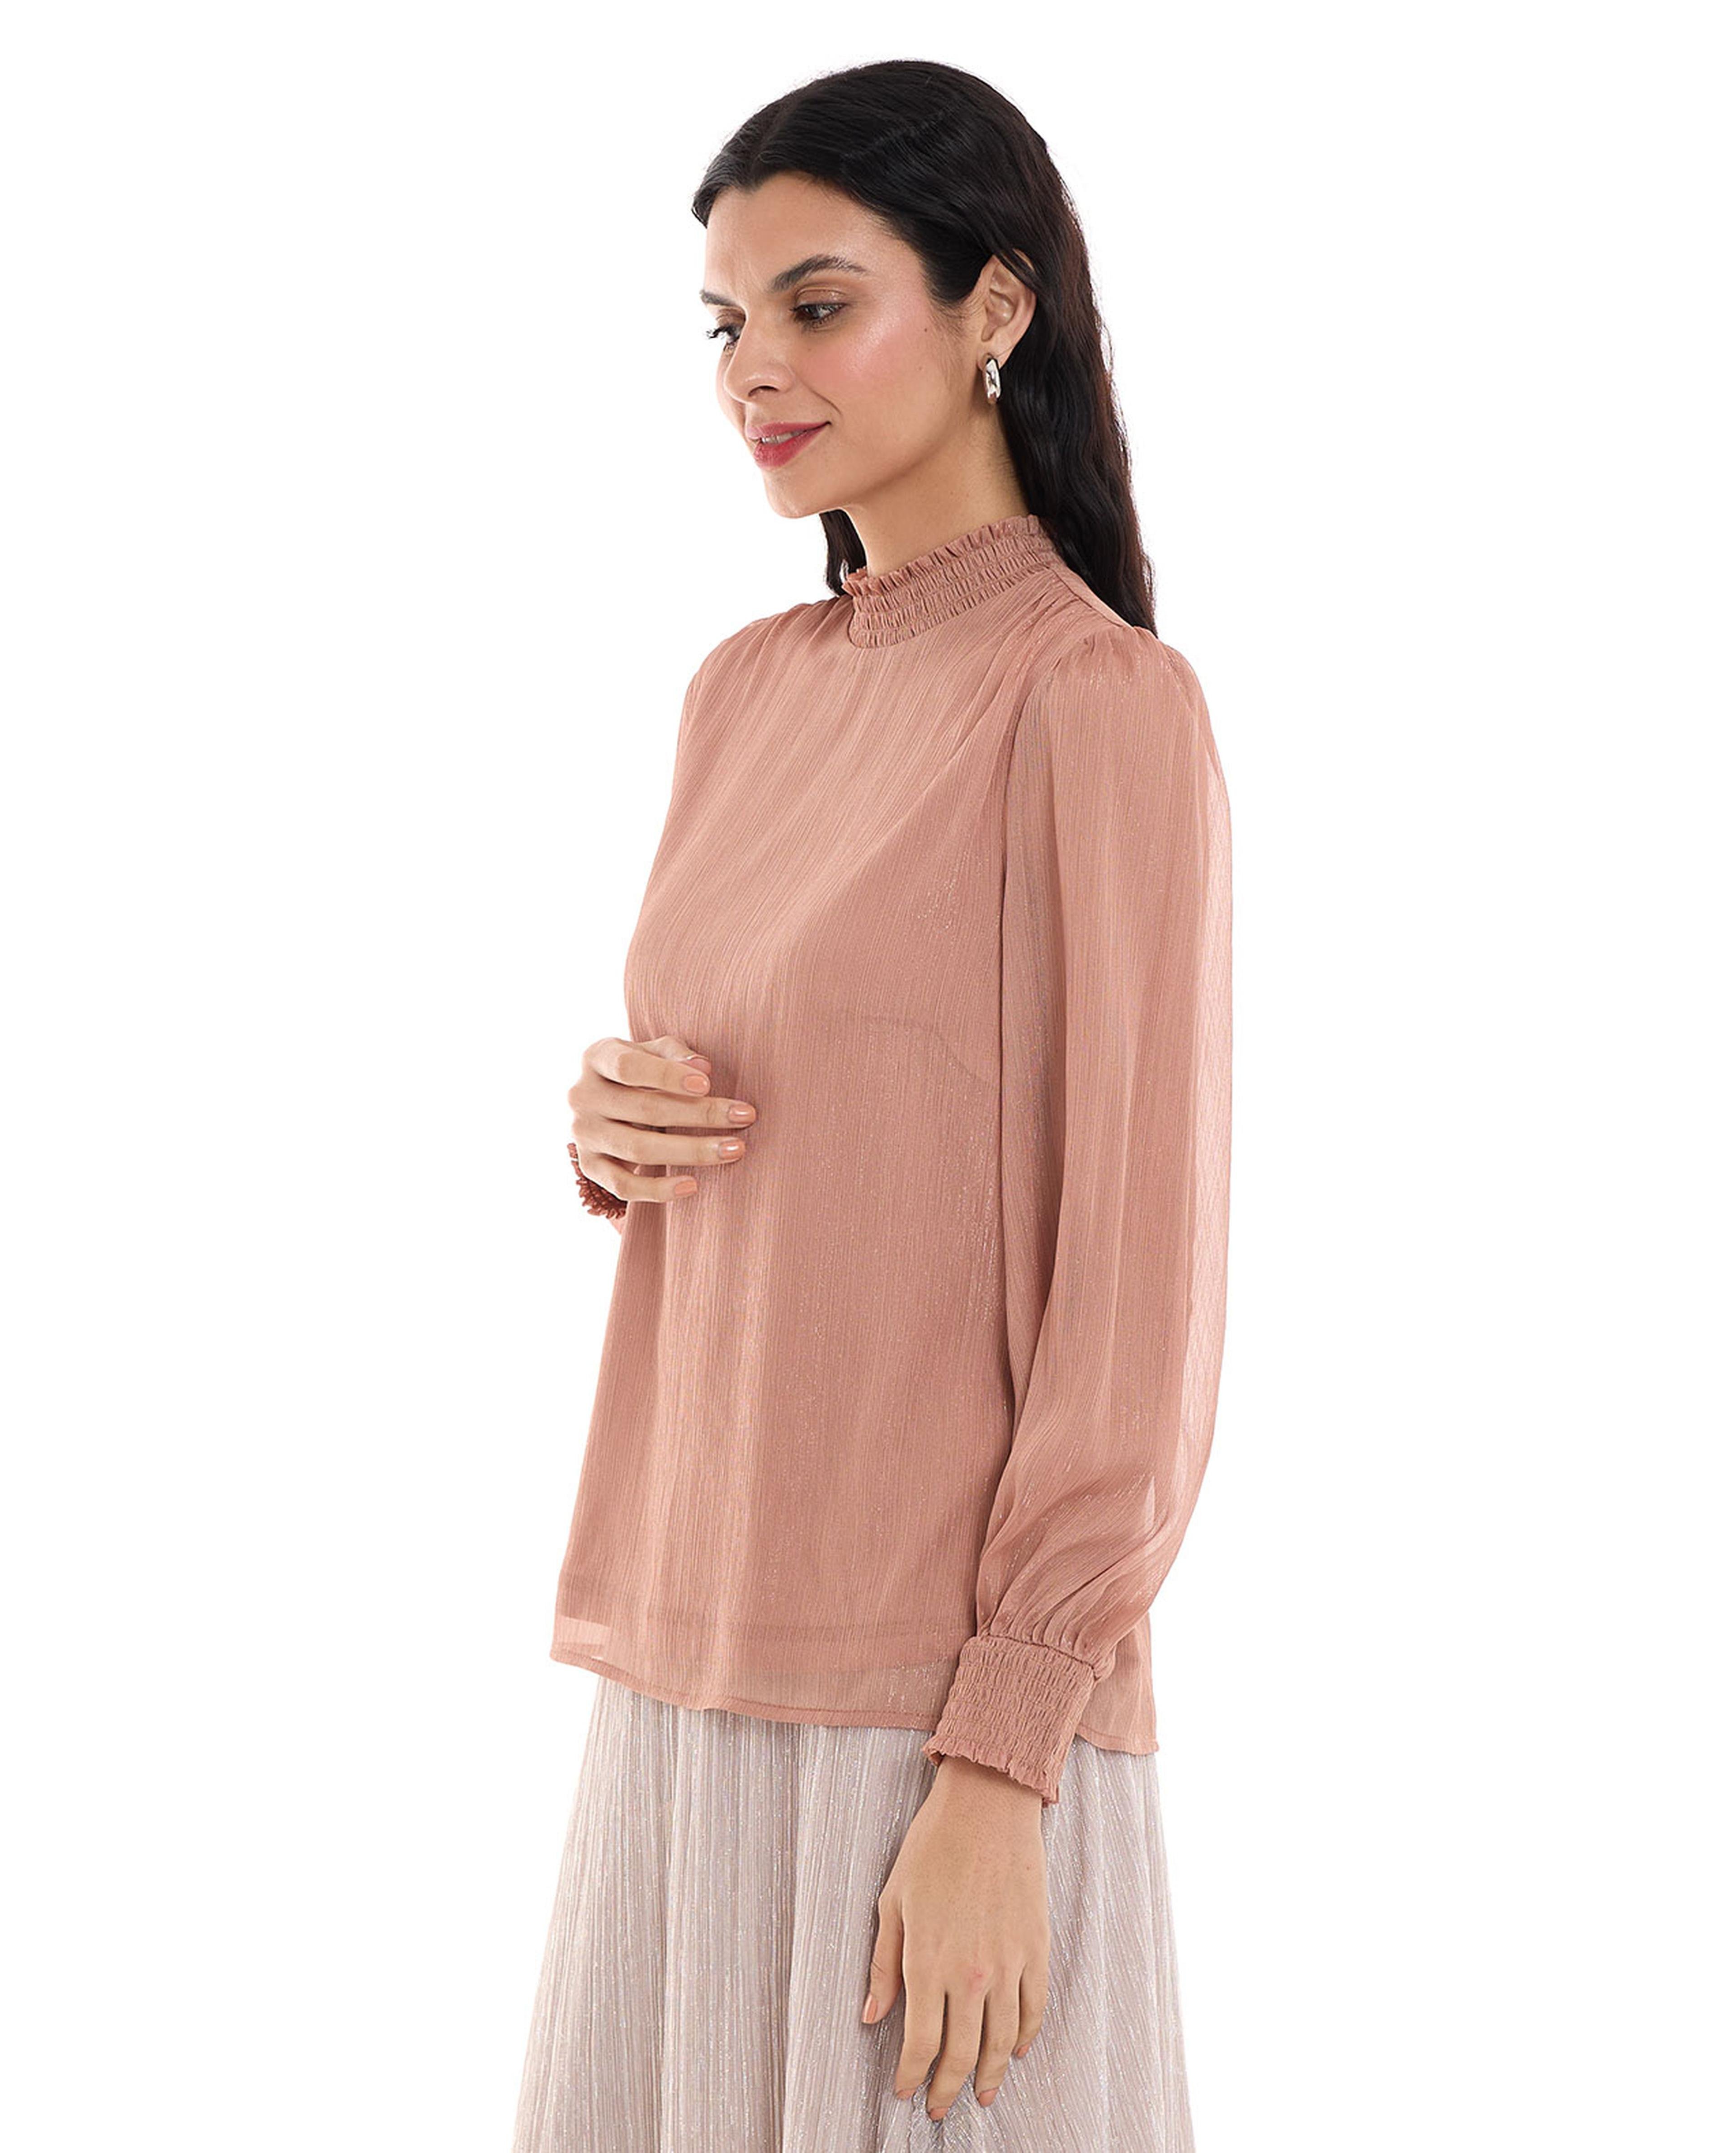 Shimmer Top with Mock Neck and Bishop Sleeves